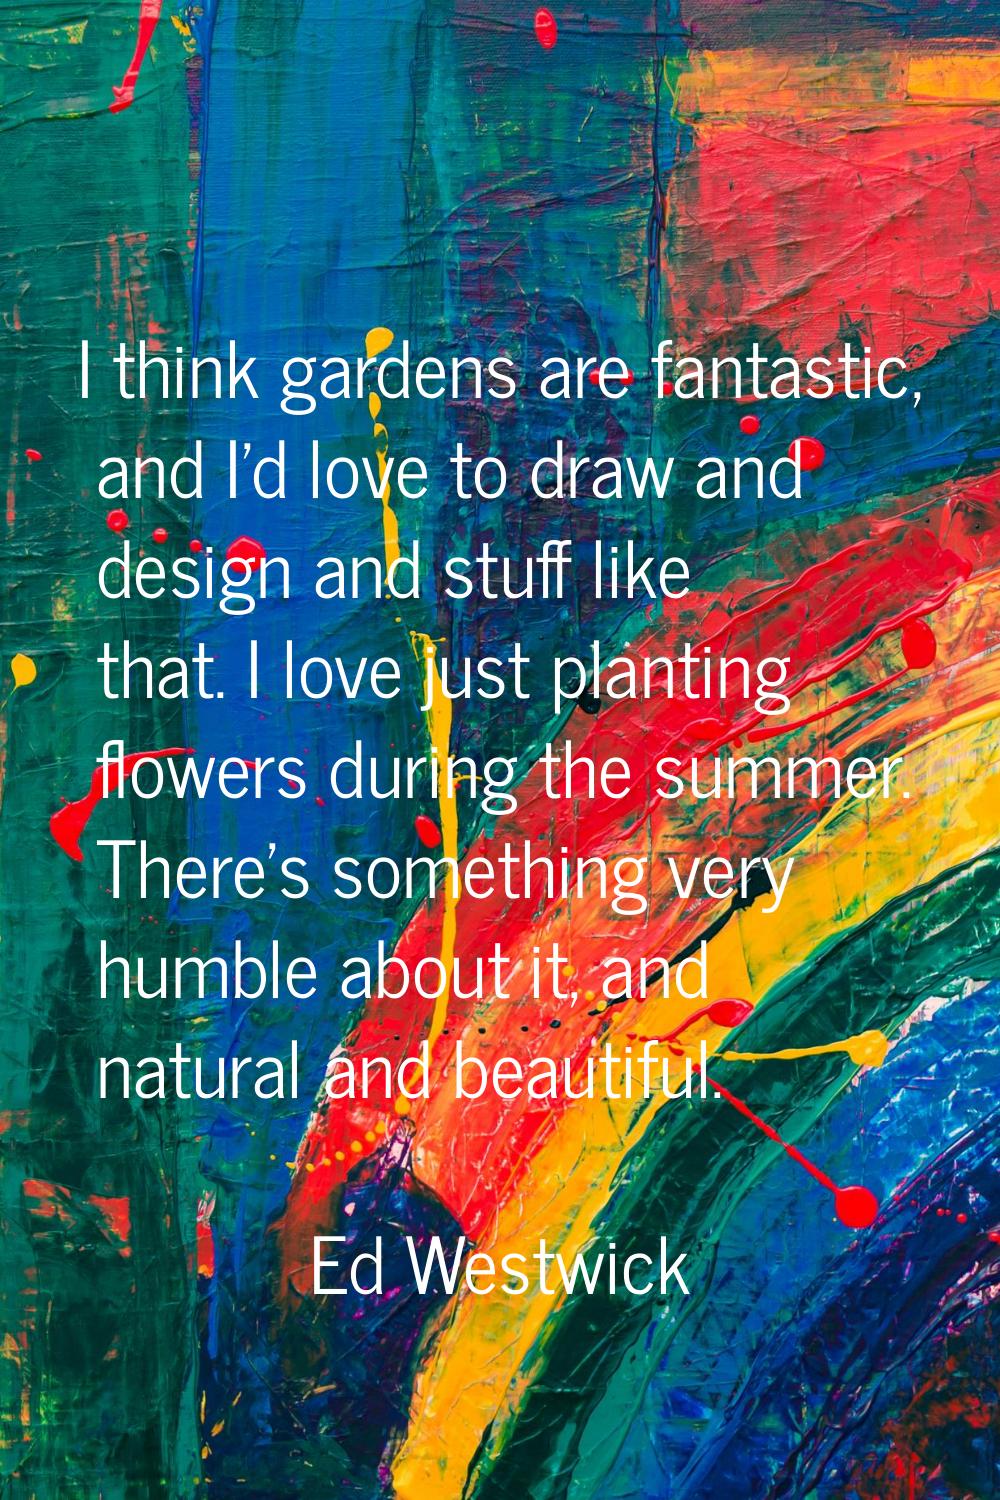 I think gardens are fantastic, and I'd love to draw and design and stuff like that. I love just pla